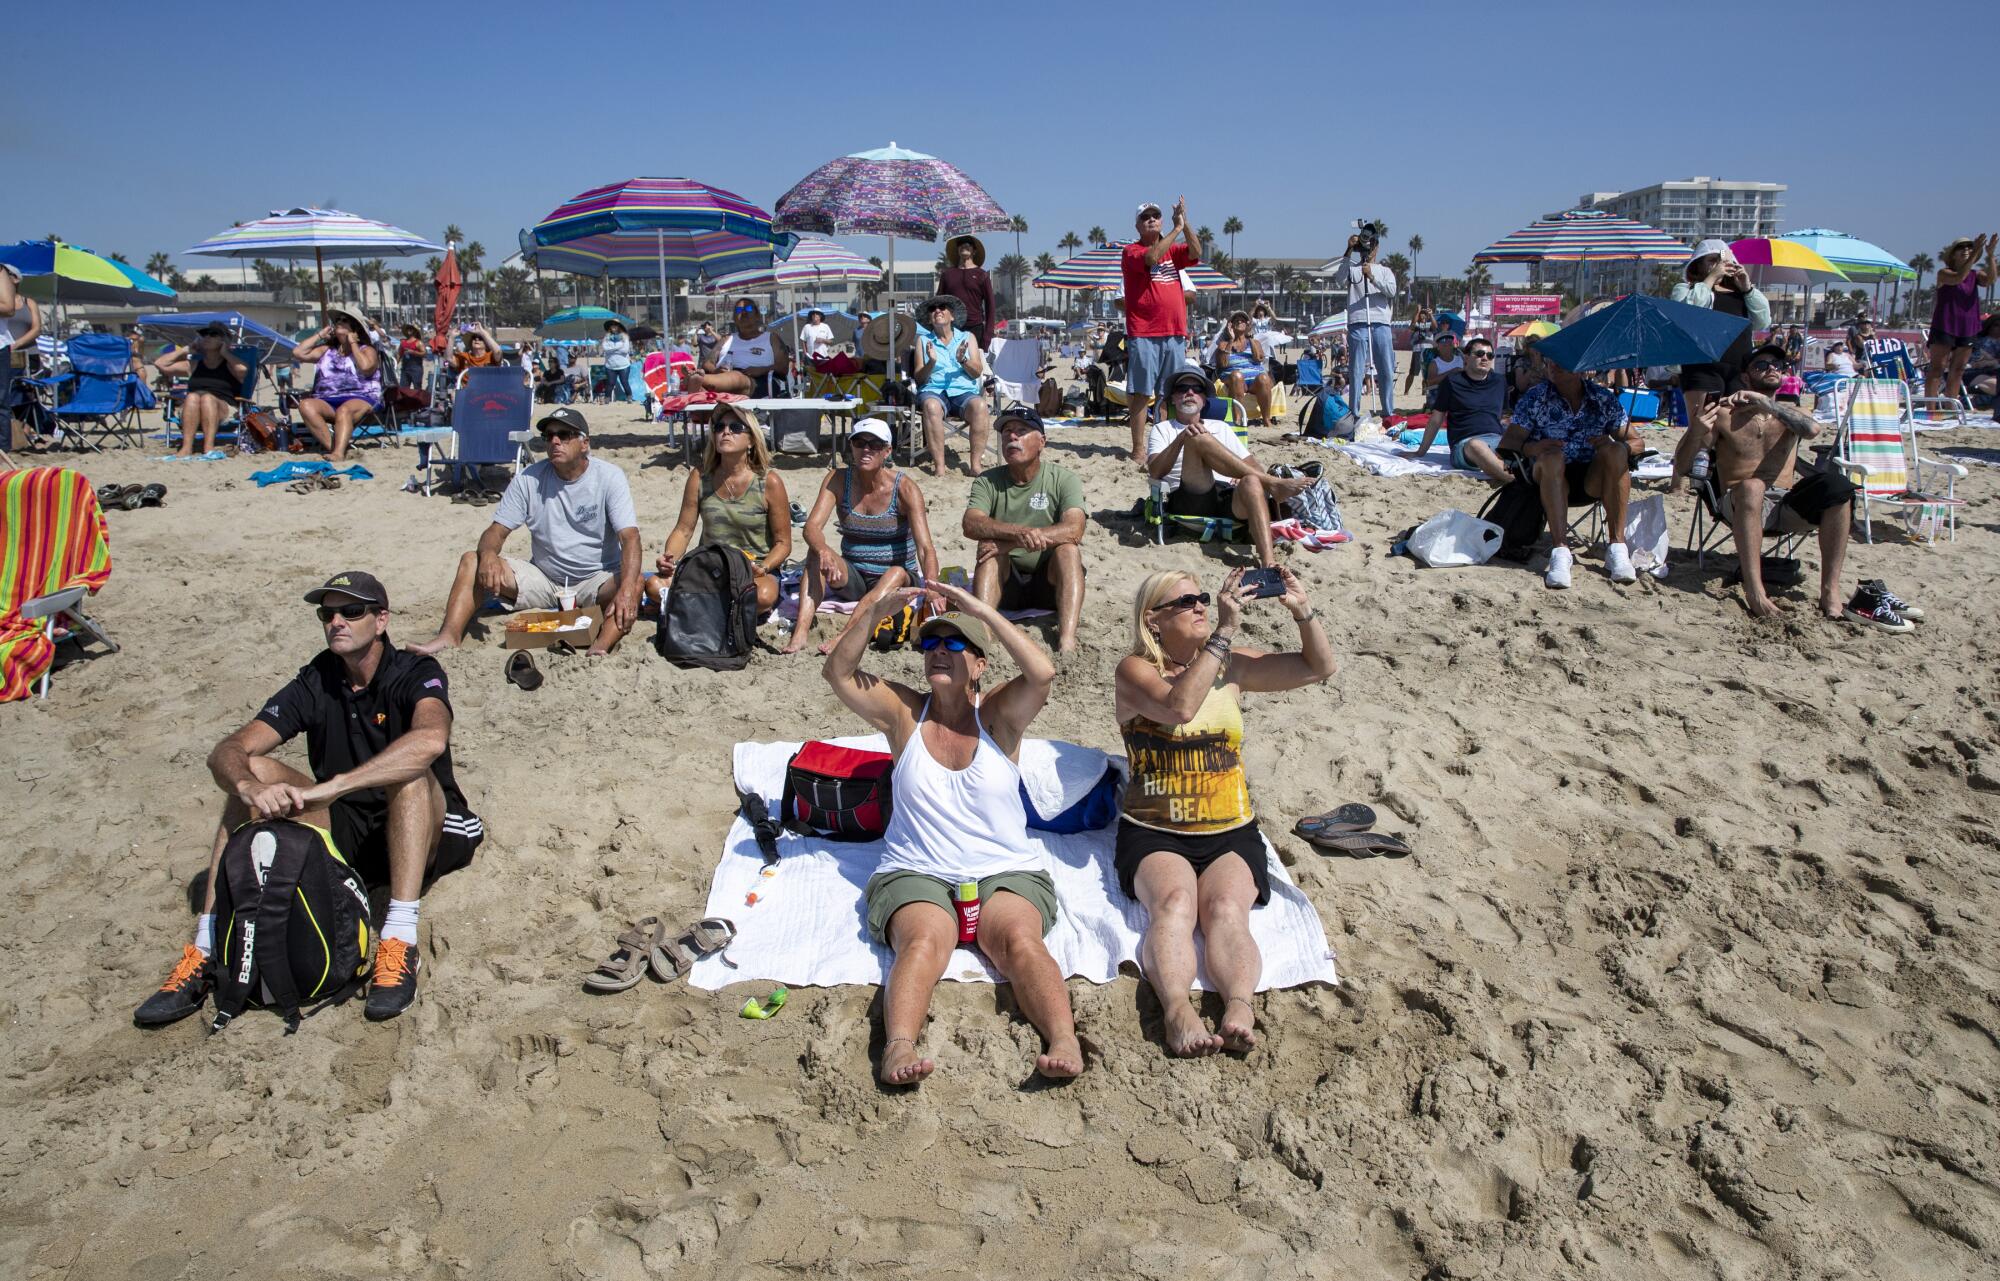  Spectators watch as aircraft perform during the Pacific Airshow